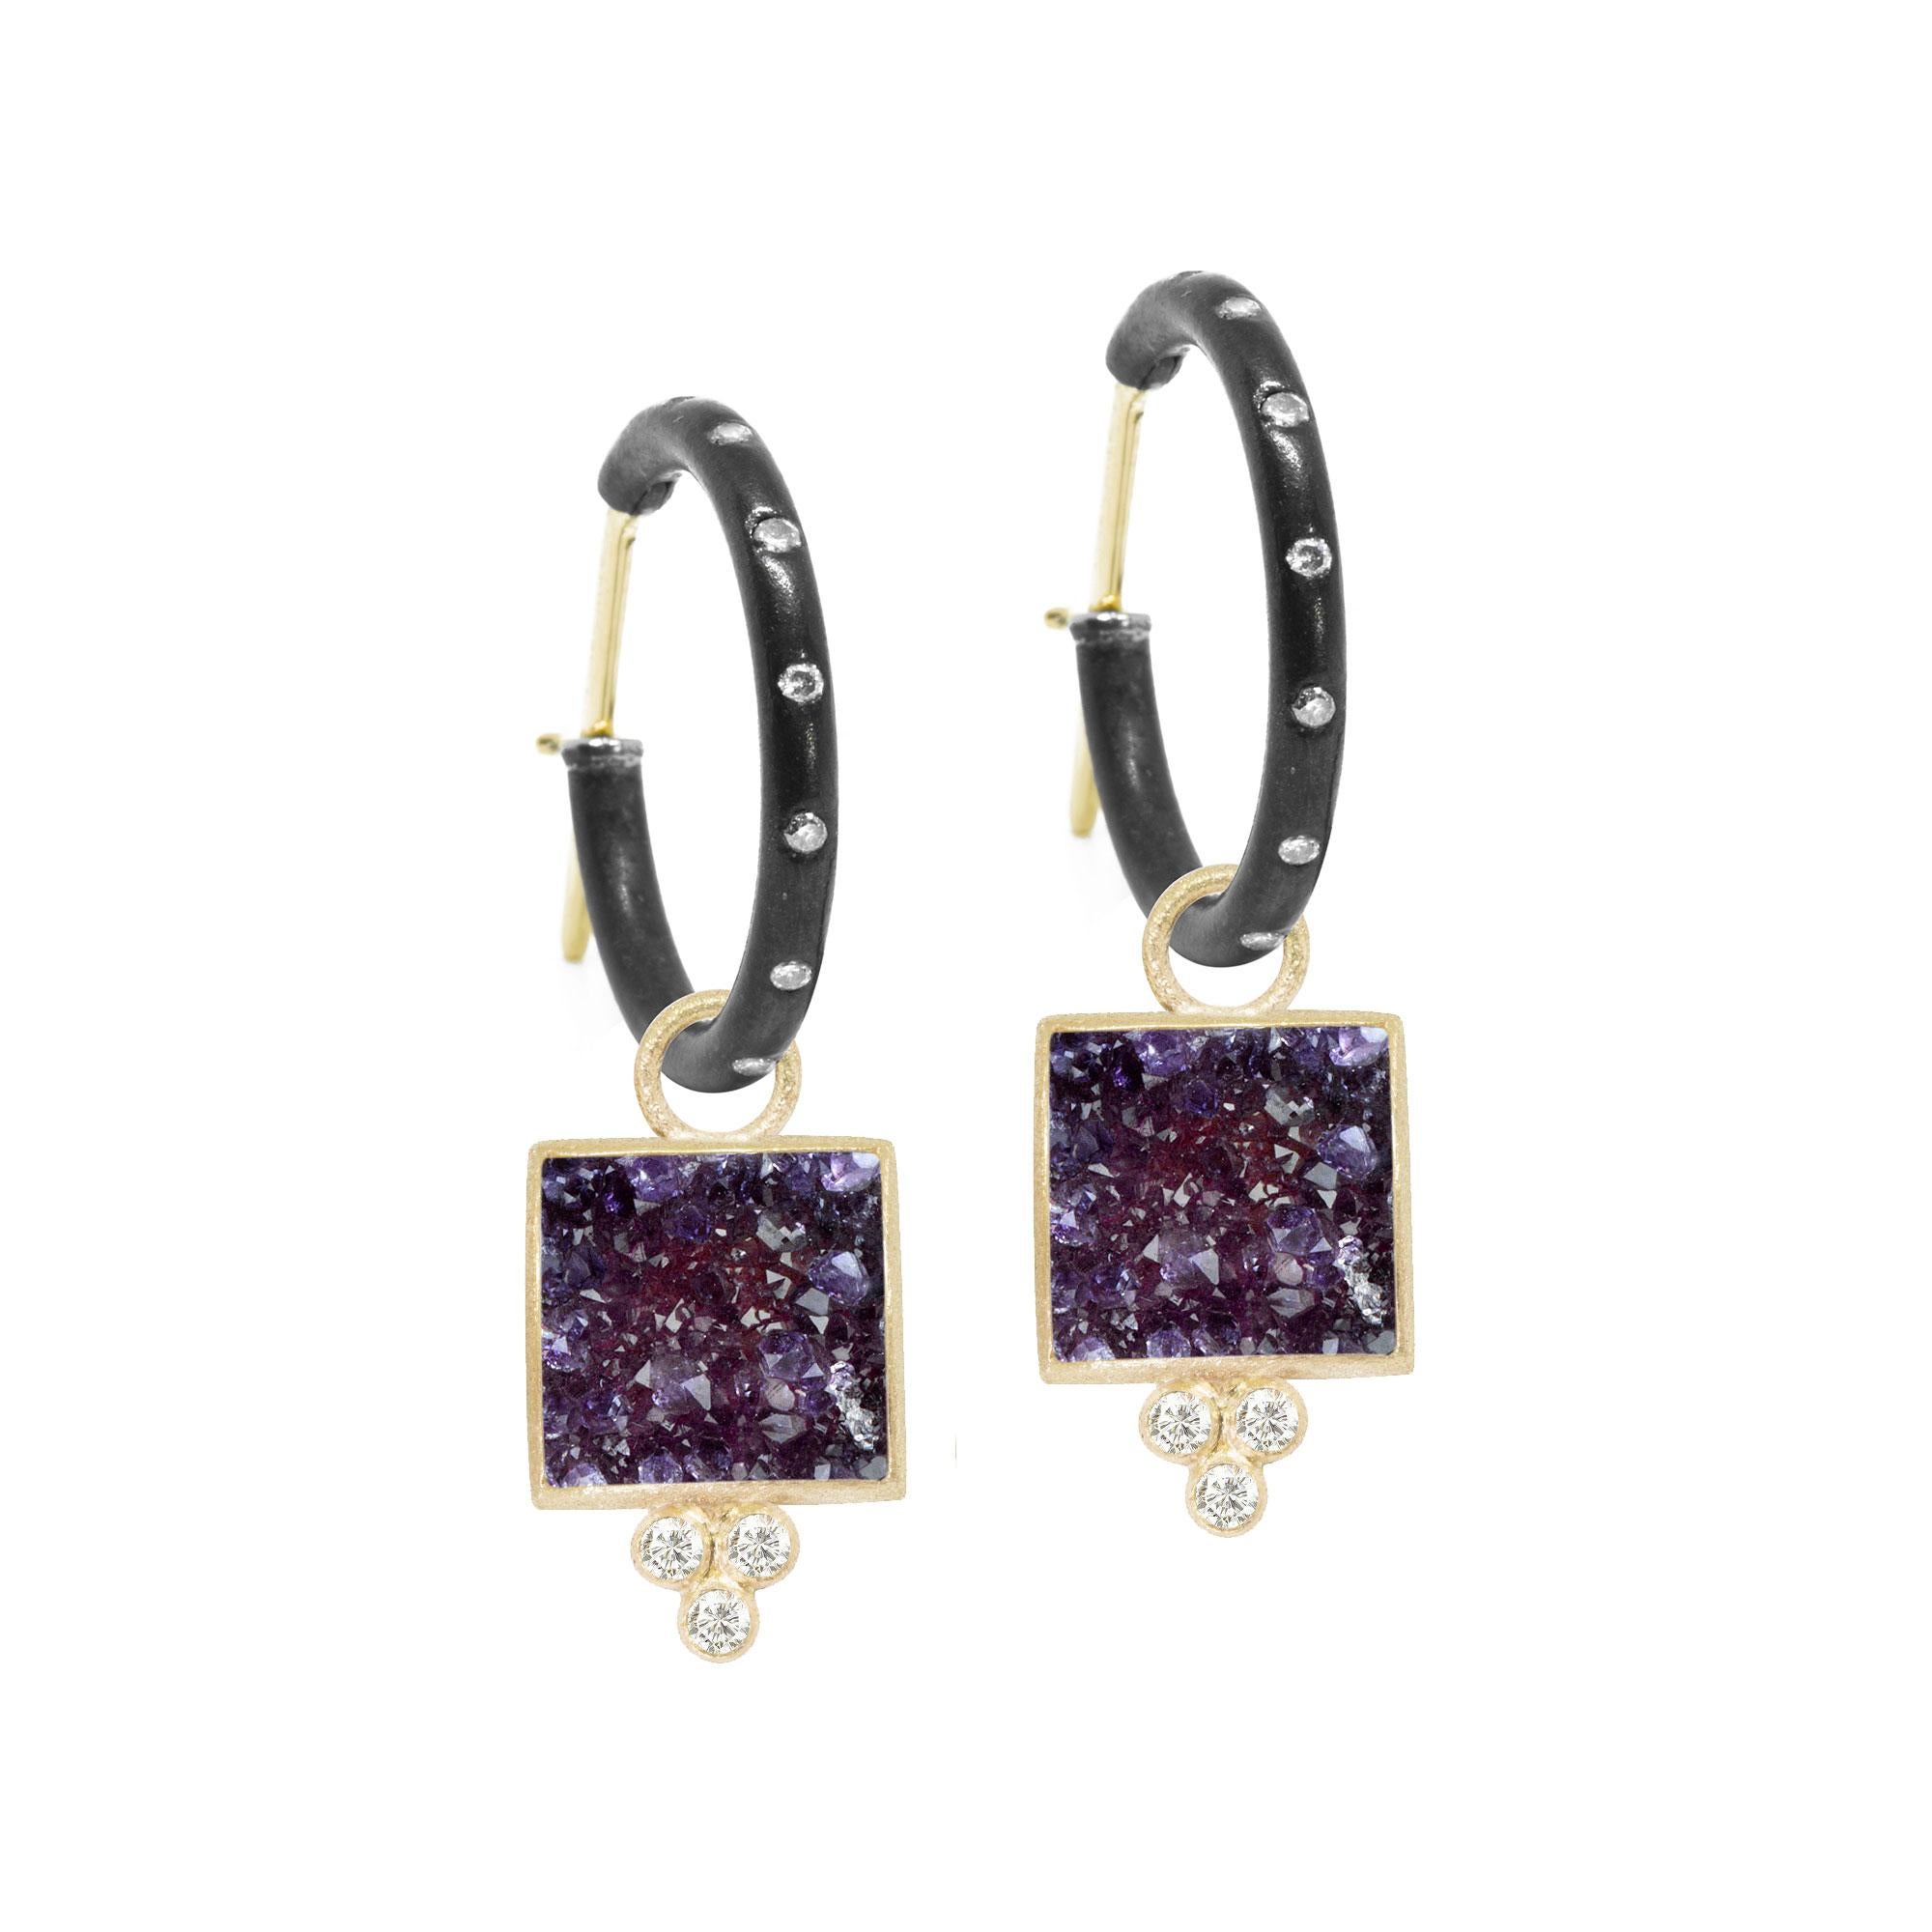 Square dance: Designed with hand-faceted amethyst druzy framed in a textured gold, our diamond-accented Ariana Gold Charms pair with any of our hoops and mix well with other styles.
Nina Nguyen Design's patent-pending earrings have an element on the